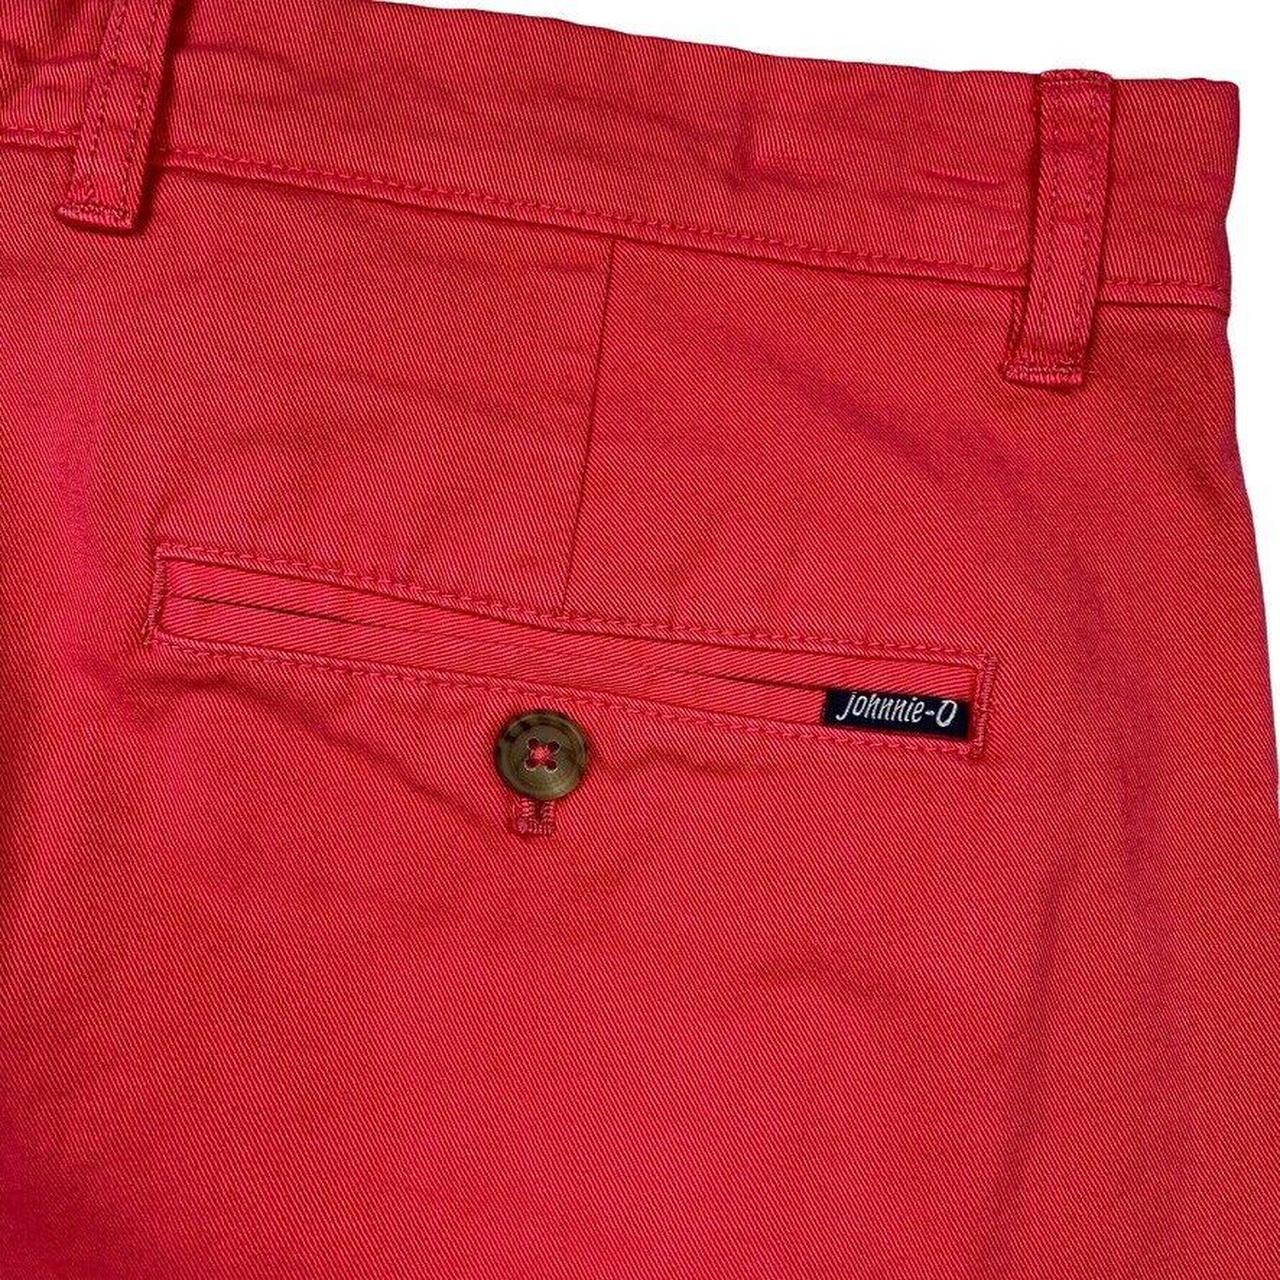 Product Image 3 - Johnnie-O Men's Cotton Stretch Chino